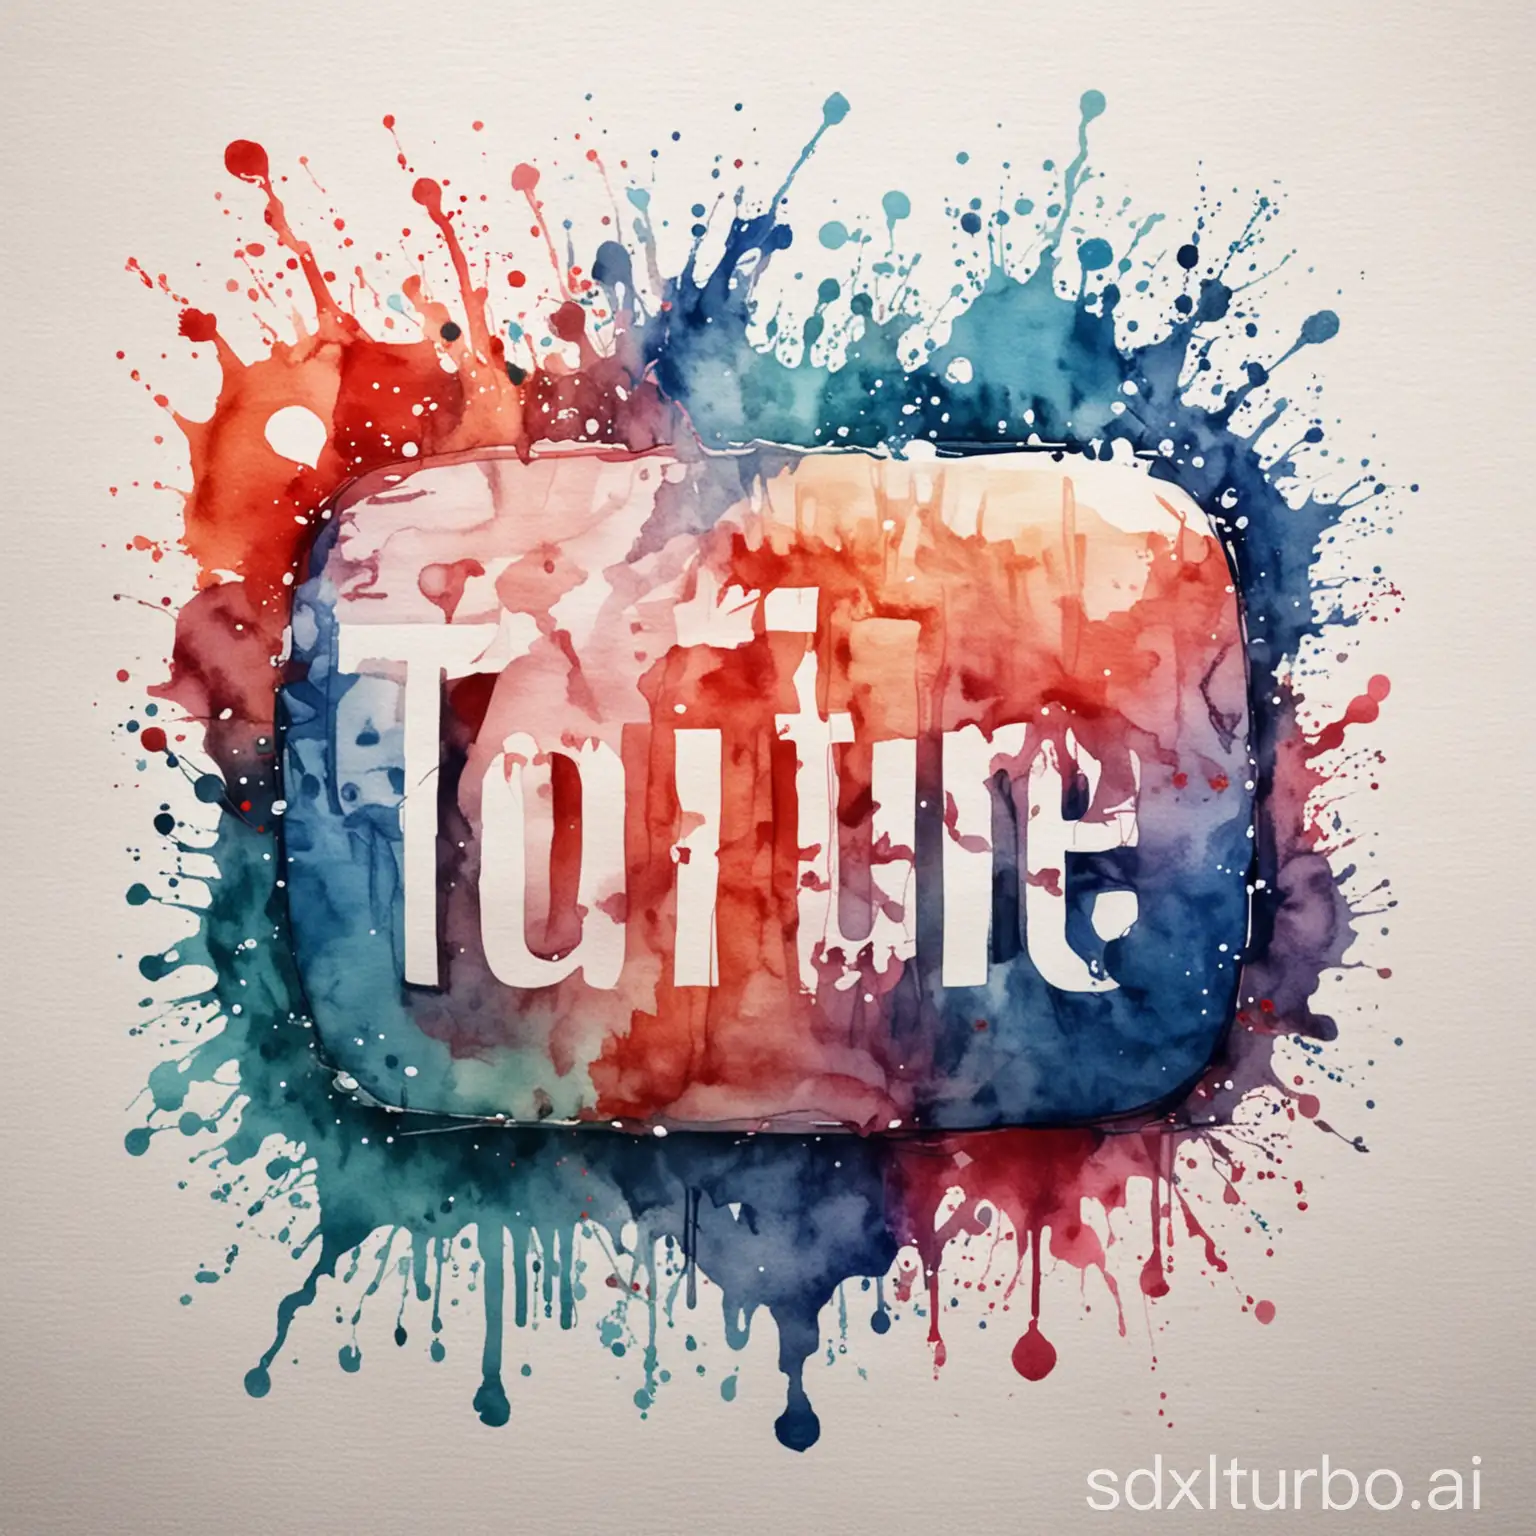 YOUTUBE LOGO IN WATER COLOR

